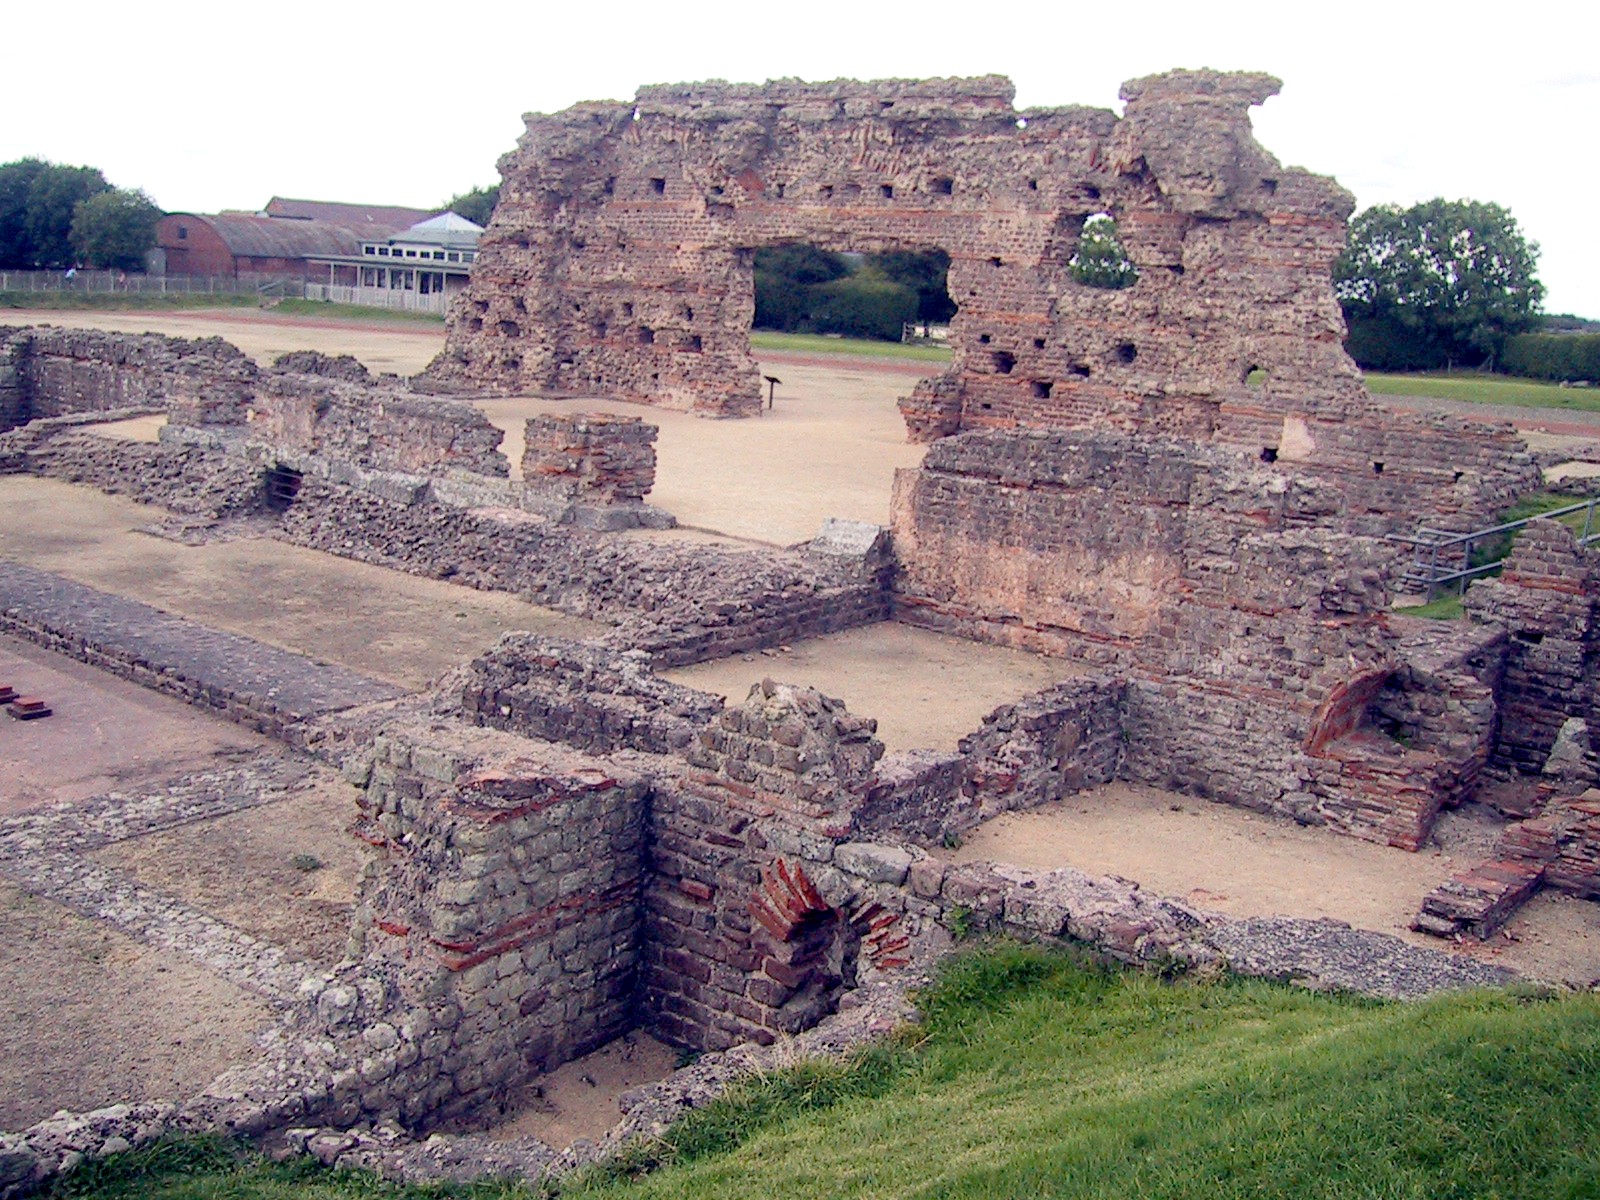 Wroxeter, near present-day Shrewsbury. Although the basilica of the Roman baths fell into disuse around 350 CE, a later phase of large wooden buildings with classical facades was constructed around 480, demonstrating a high level of civilization. - PHOTO BY BARRY EVANS